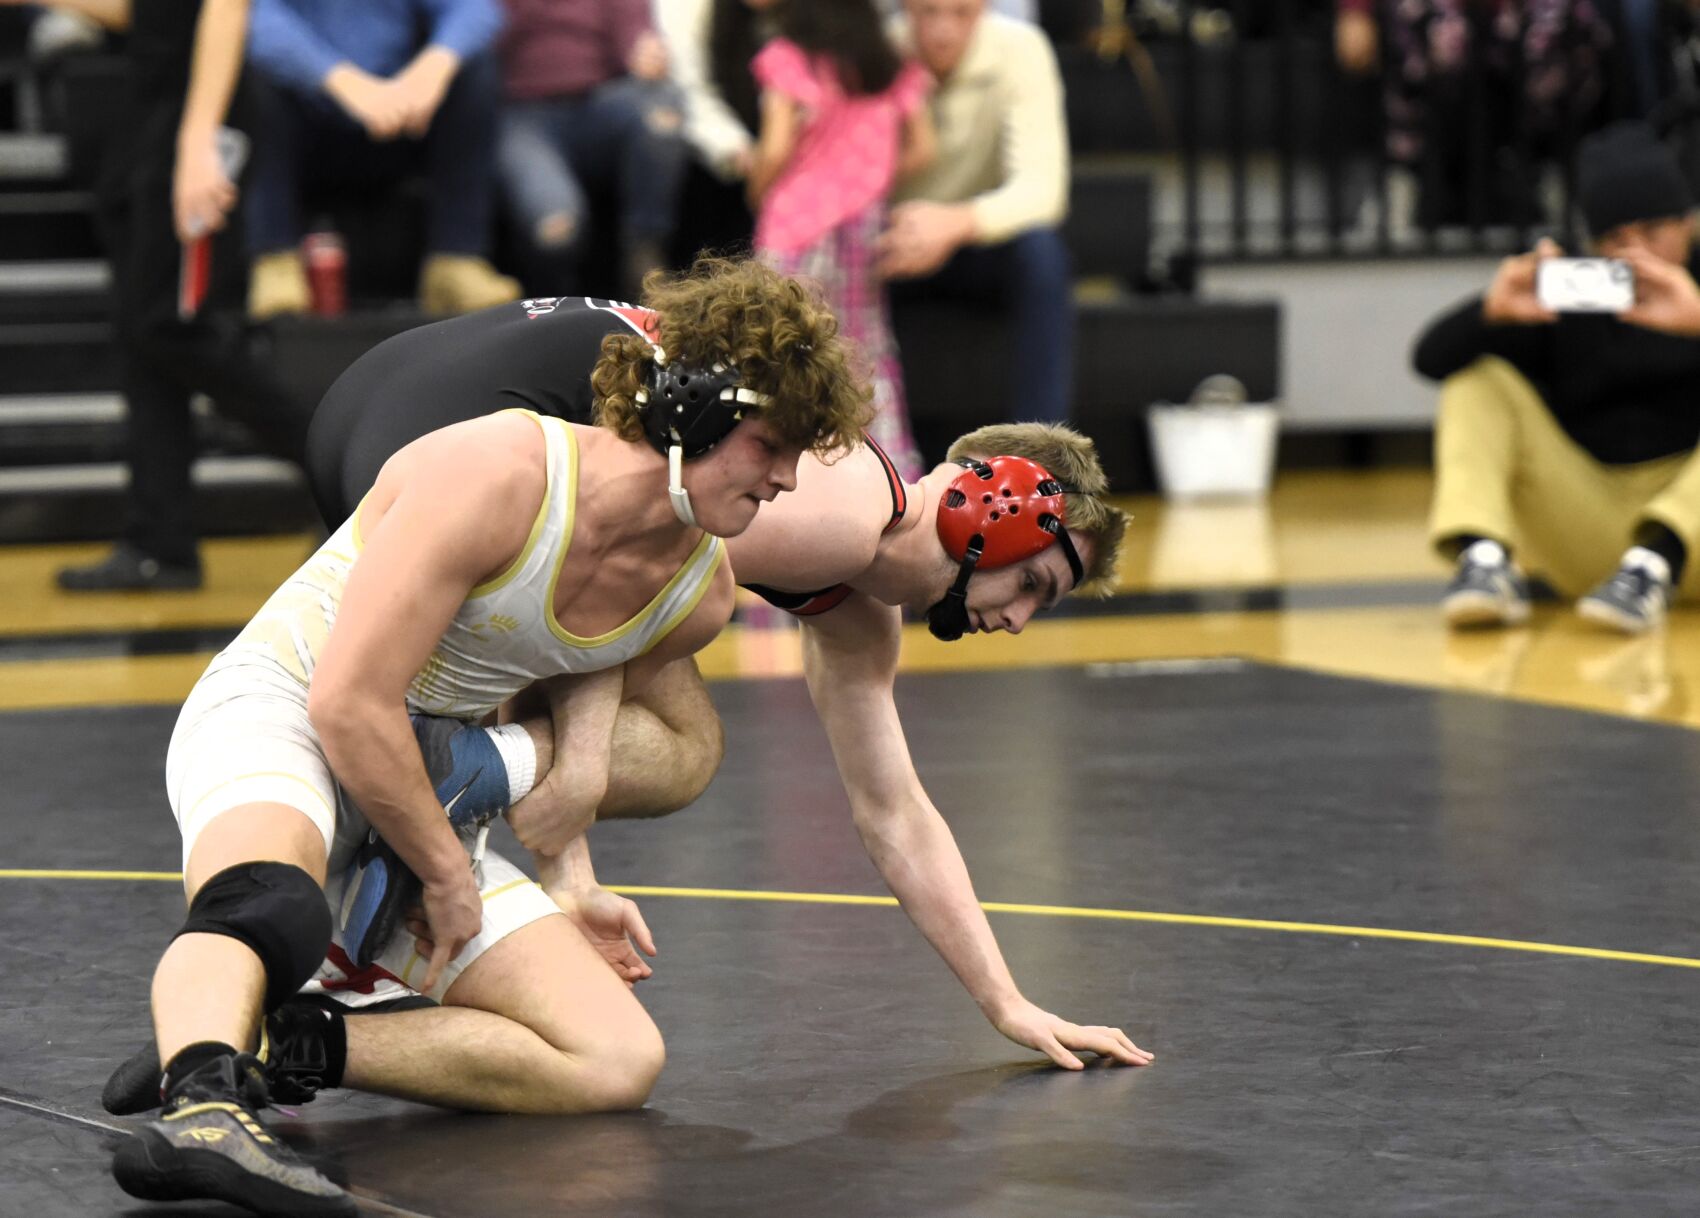 Top Ranked High School Wrestlers in the Charleston Area Across Different Weight Classes